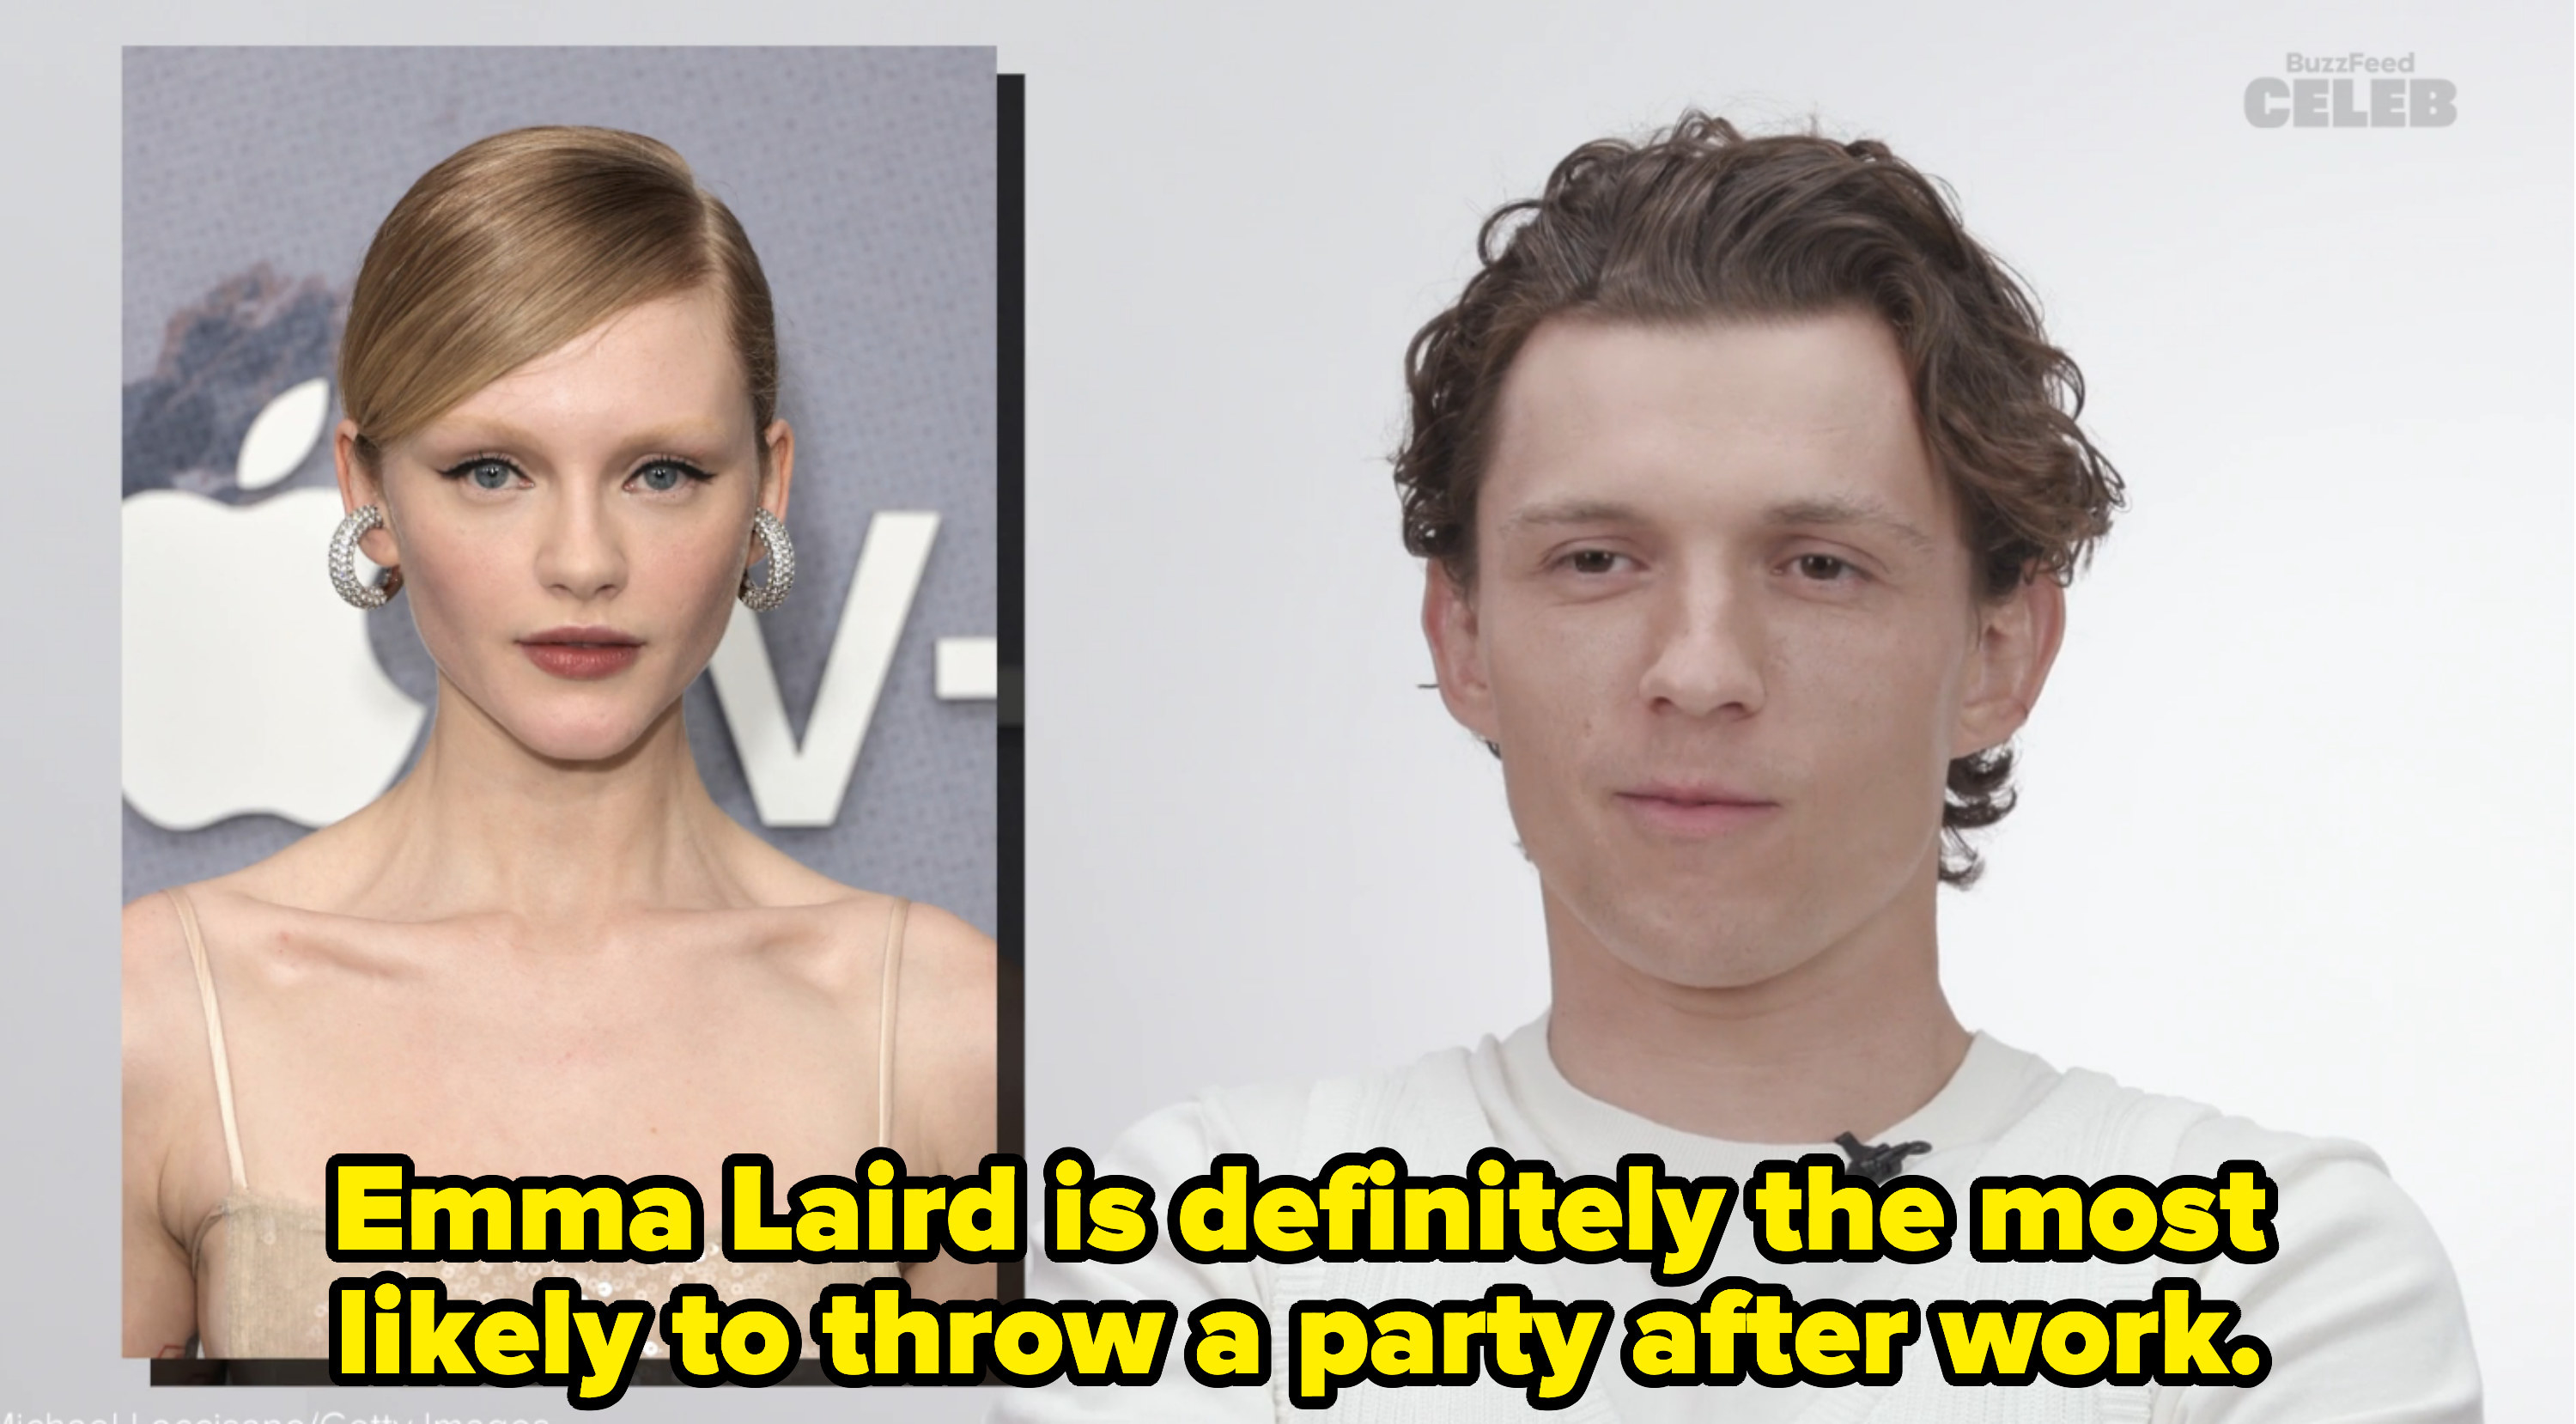 Tom said &quot;Emma Laird is definitely the most likely to throw a party after work&quot;